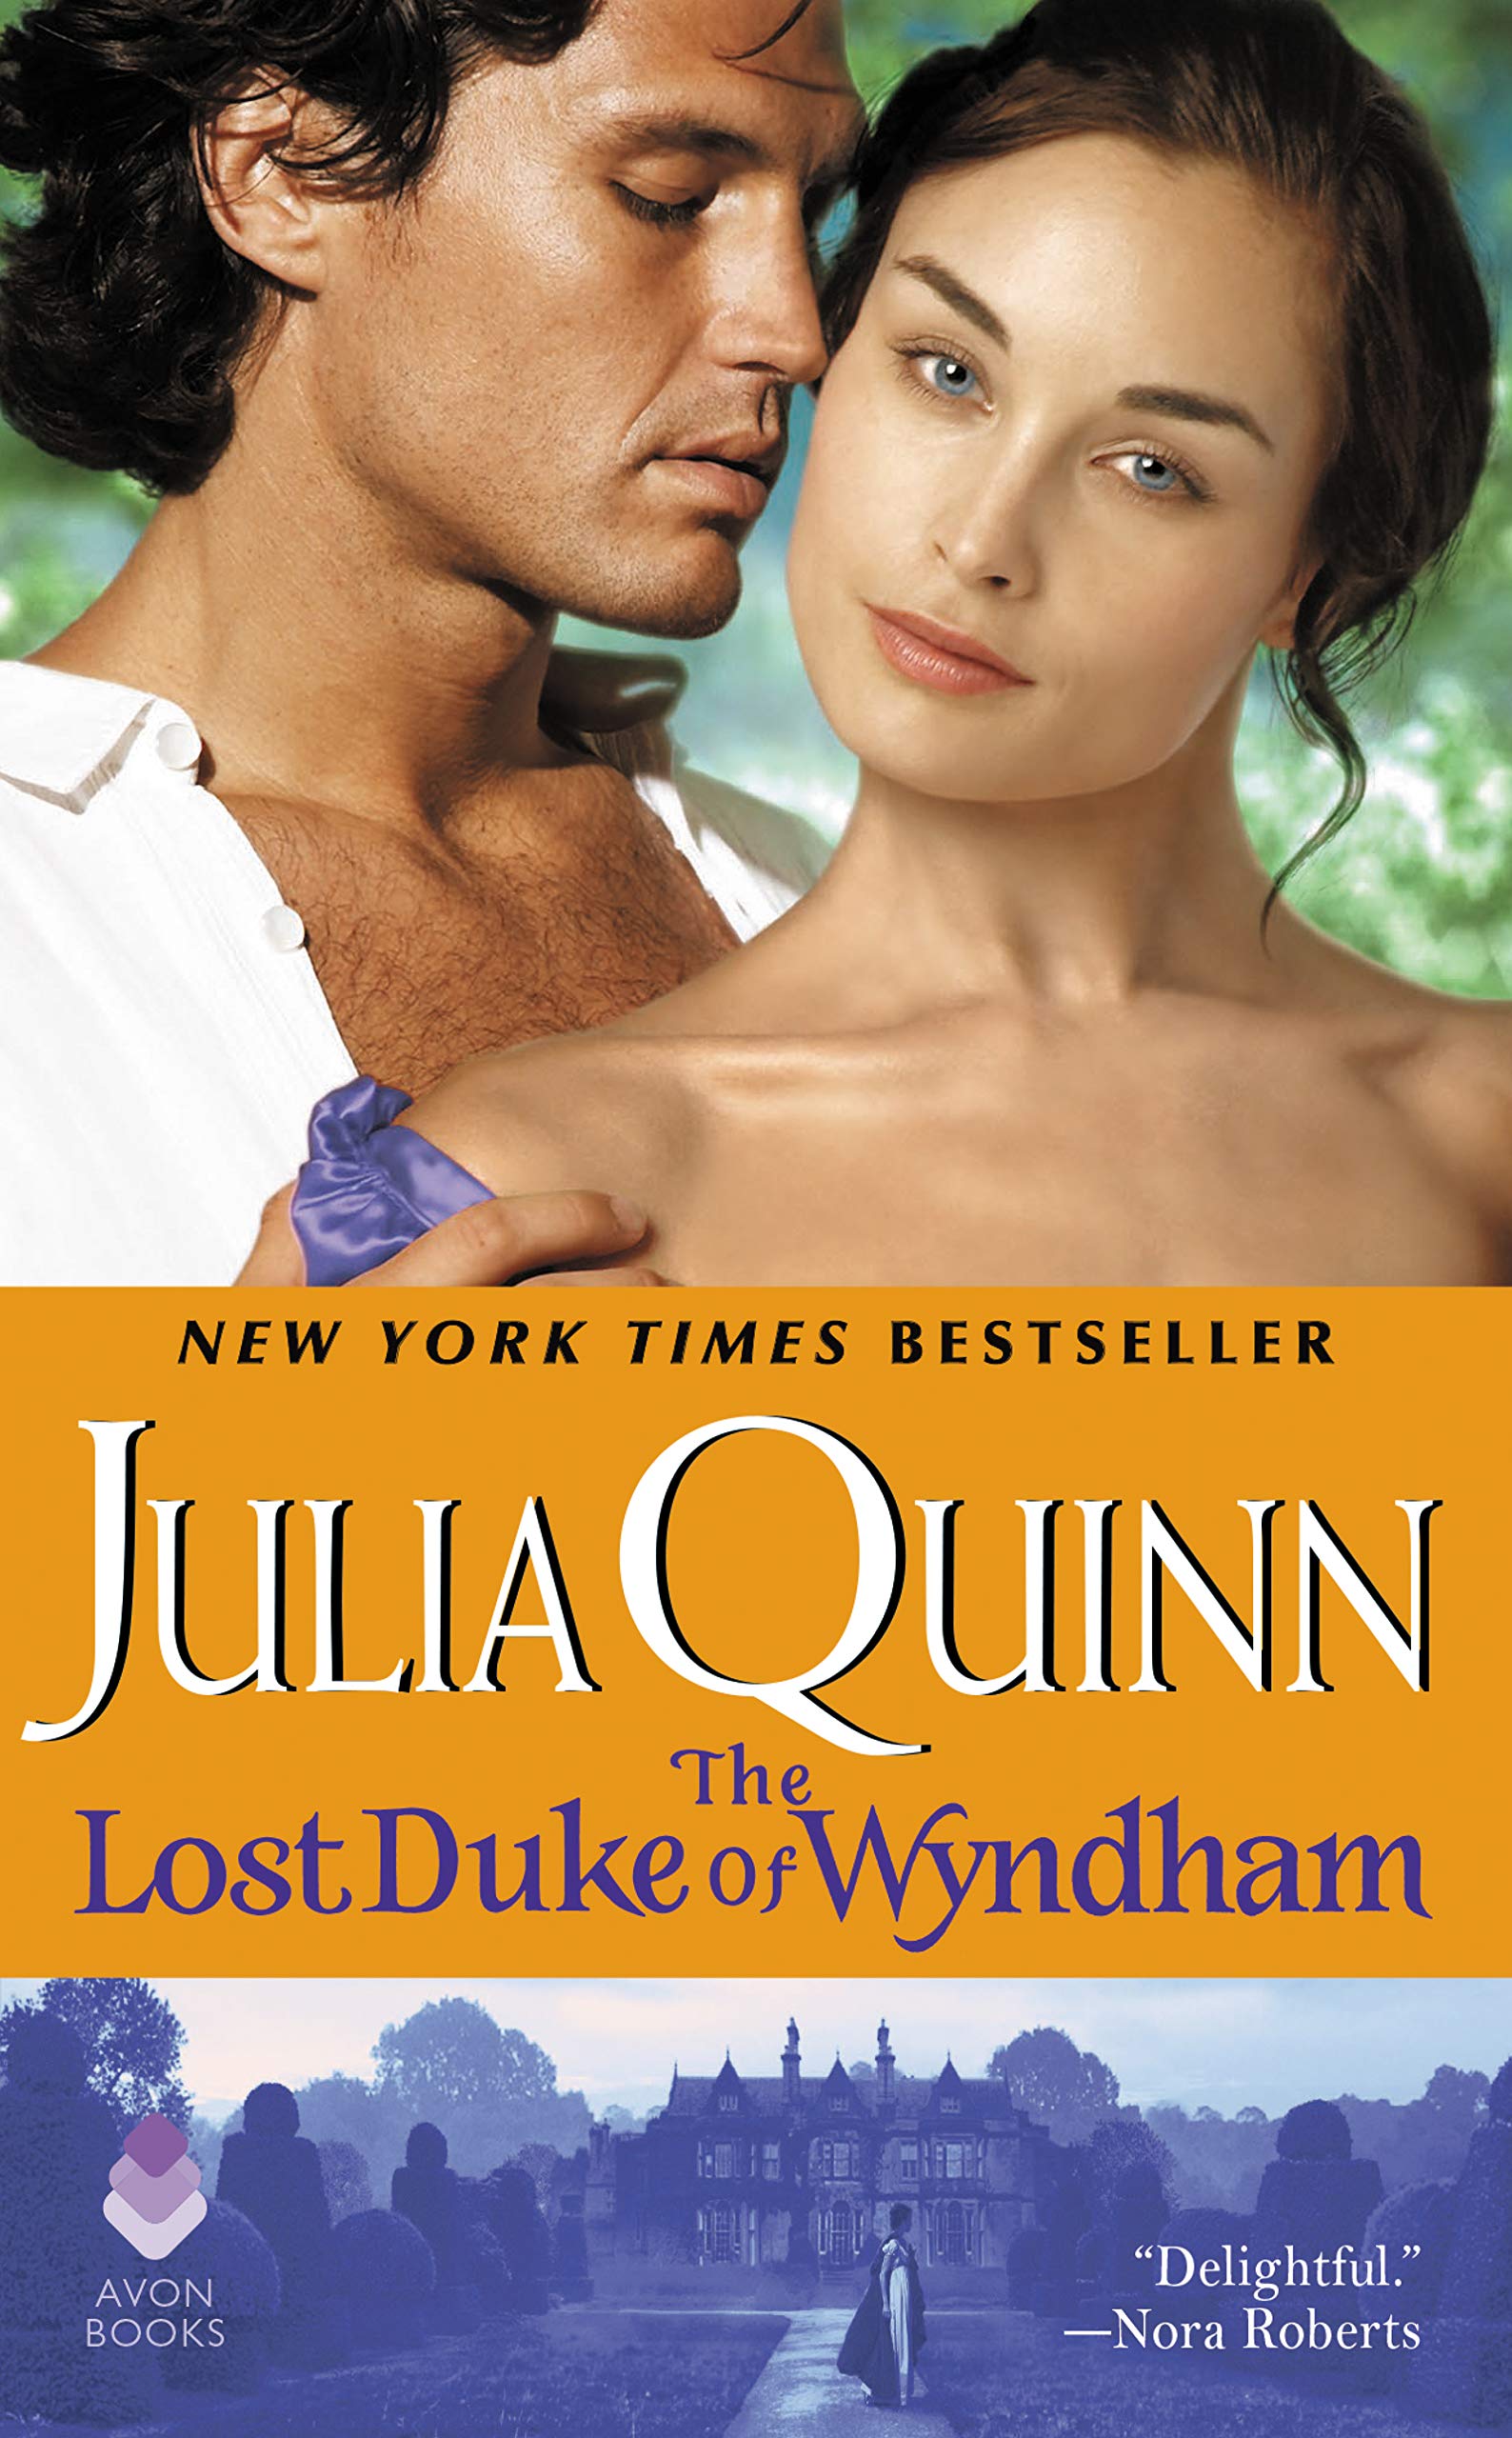 The Lost Duke of Wyndham (Two Dukes of Wyndham, Book 1)